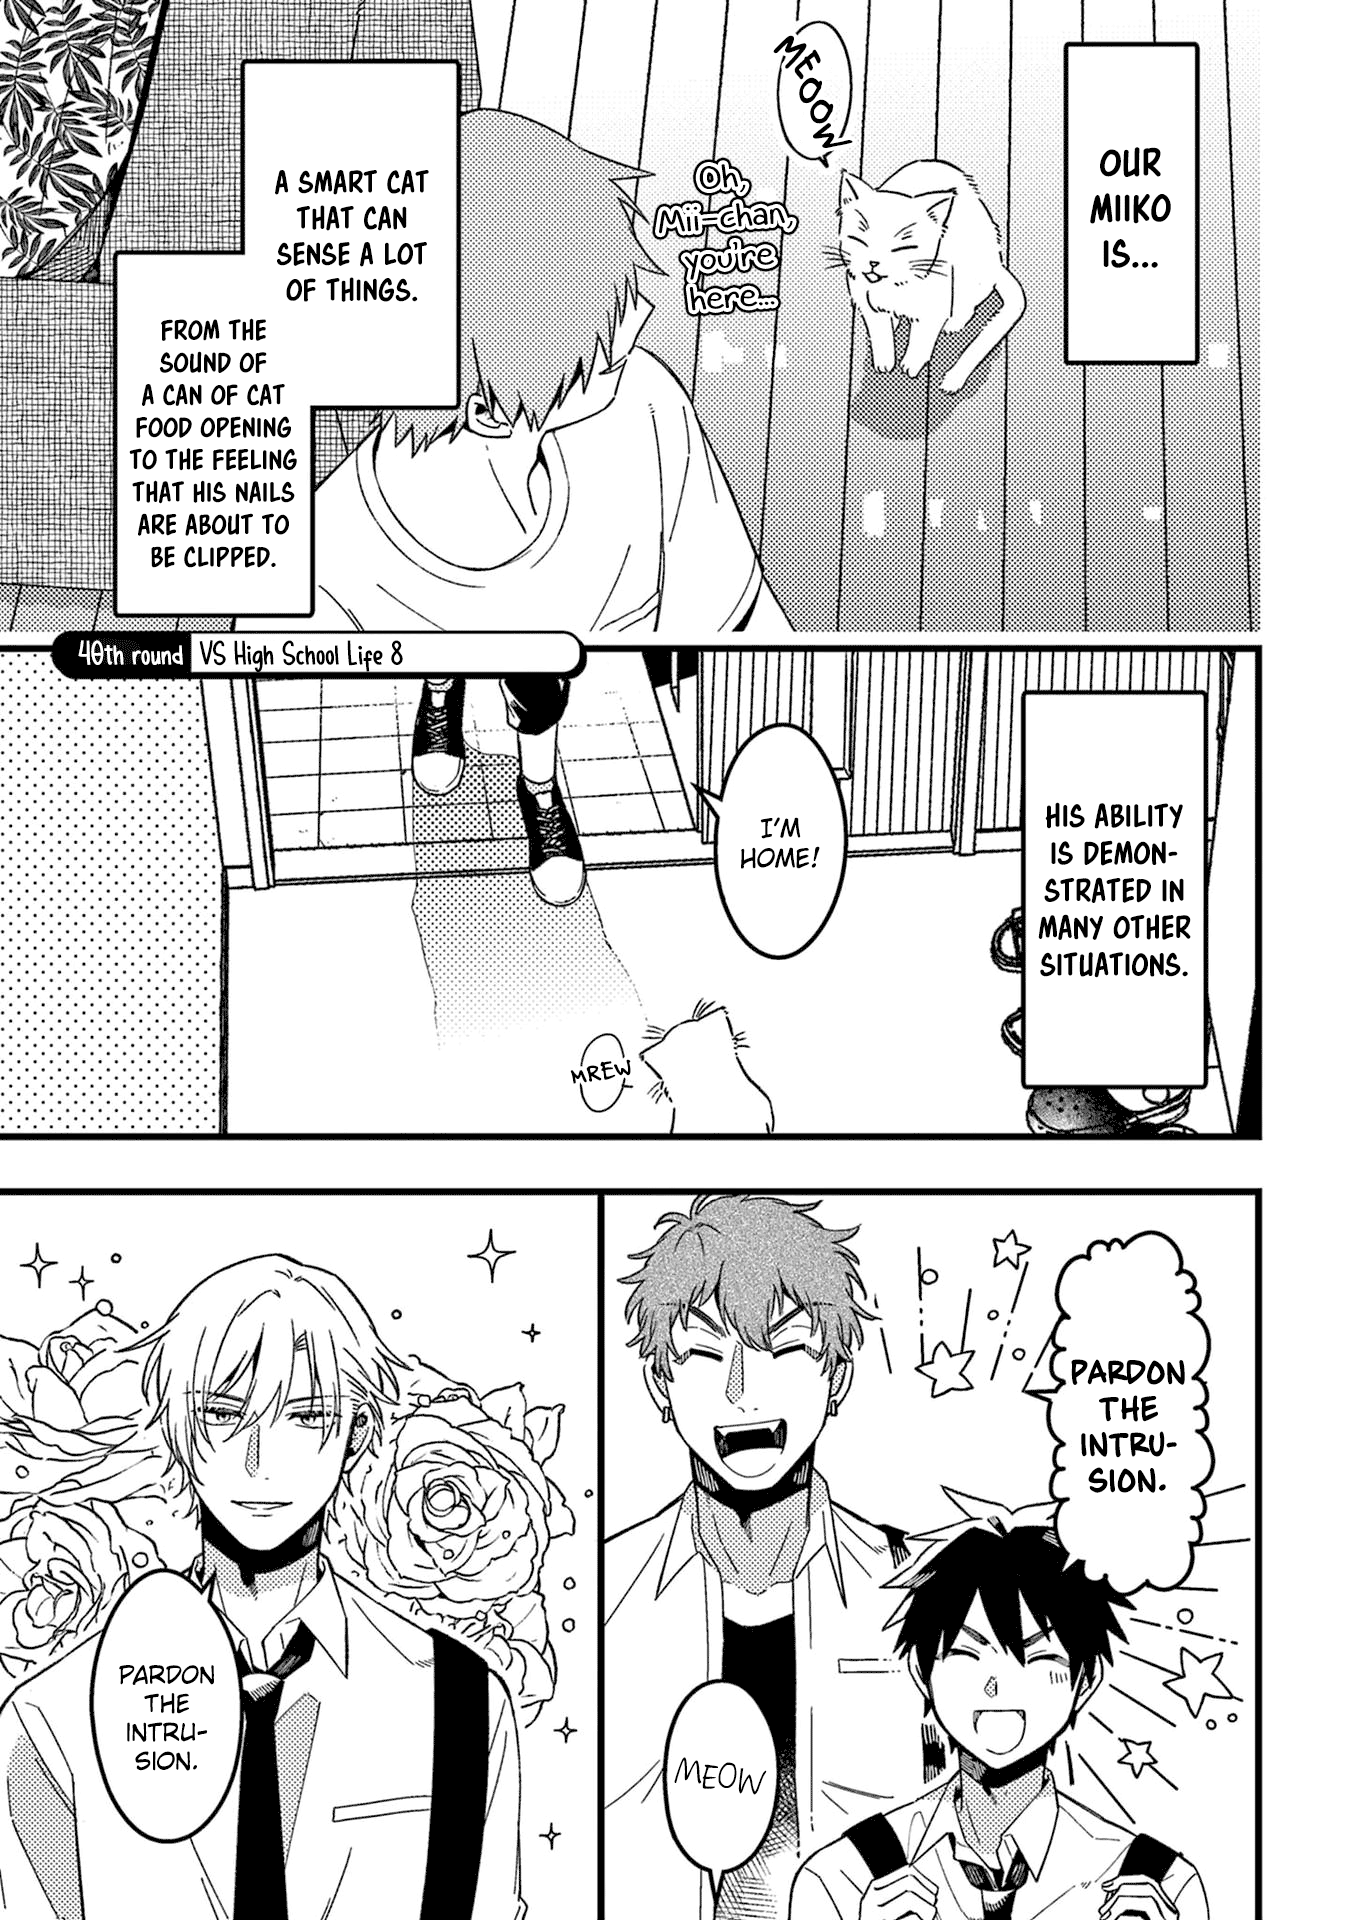 A World Where Everything Definitely Becomes Bl Vs. The Man Who Definitely Doesn't Want To Be In A Bl - Page 2